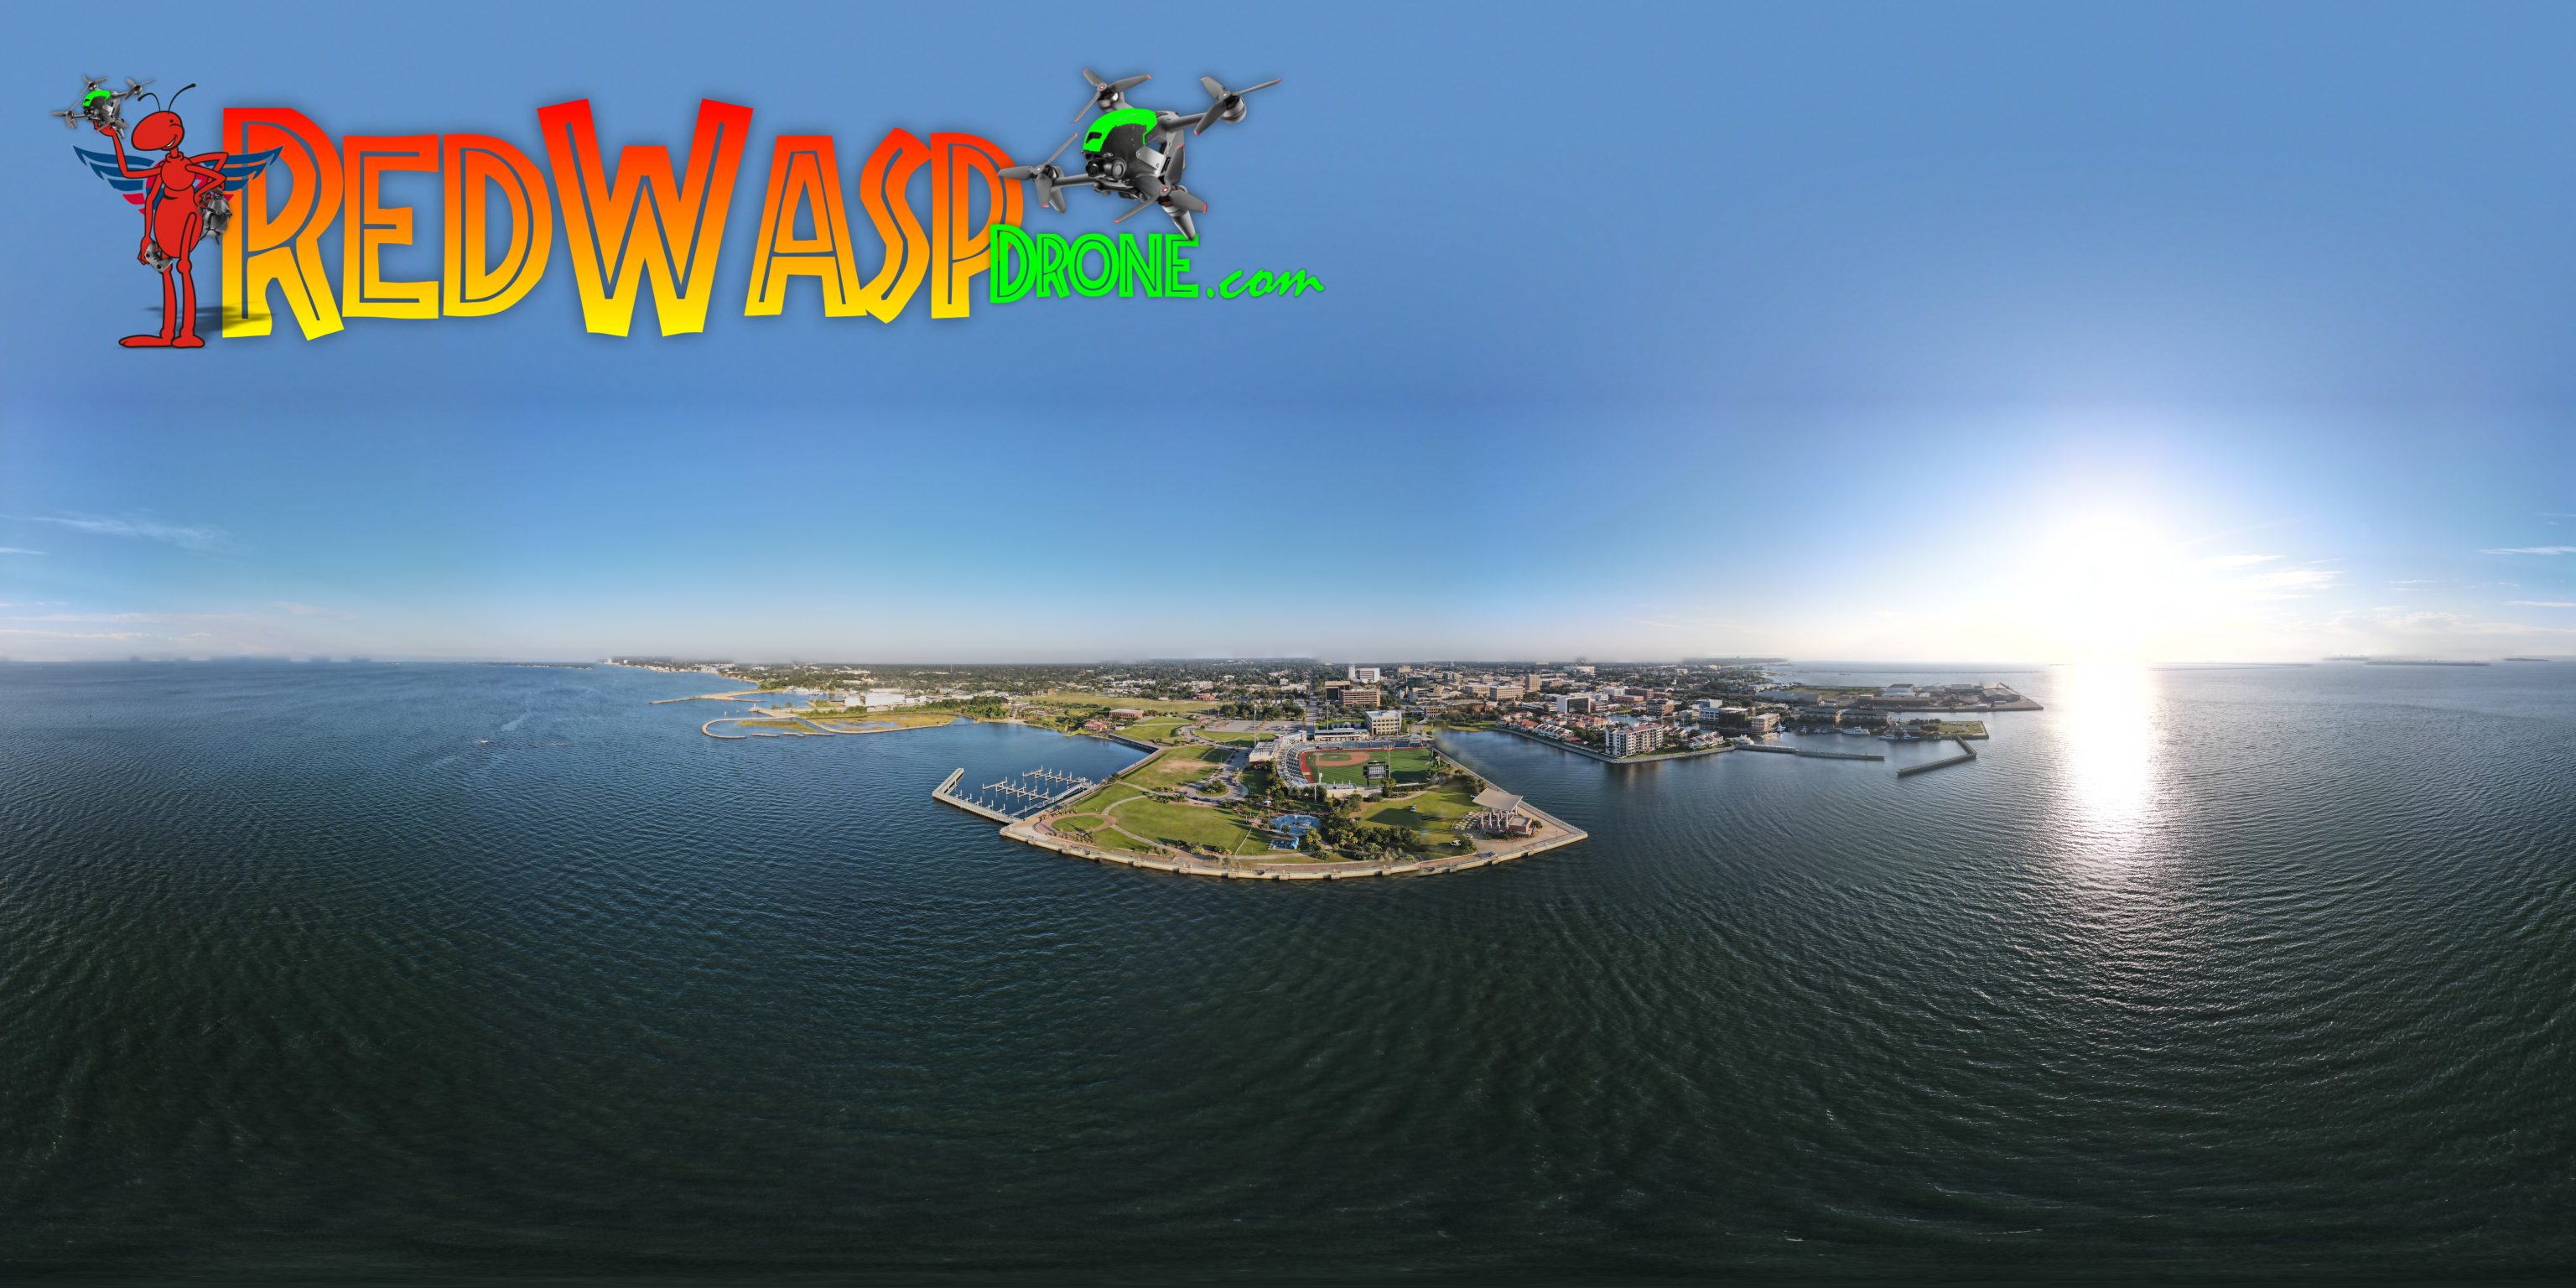 Blue Wahoos Aerials, RedWaspDrone Captures, Pensacola Aerials, Stunning Stadium Shots, Aerial Photography Masterpieces, Elevated Perspective, Drone Artistry, Birds Eye View, Baseball From Above, Spectacular Drone Shots,